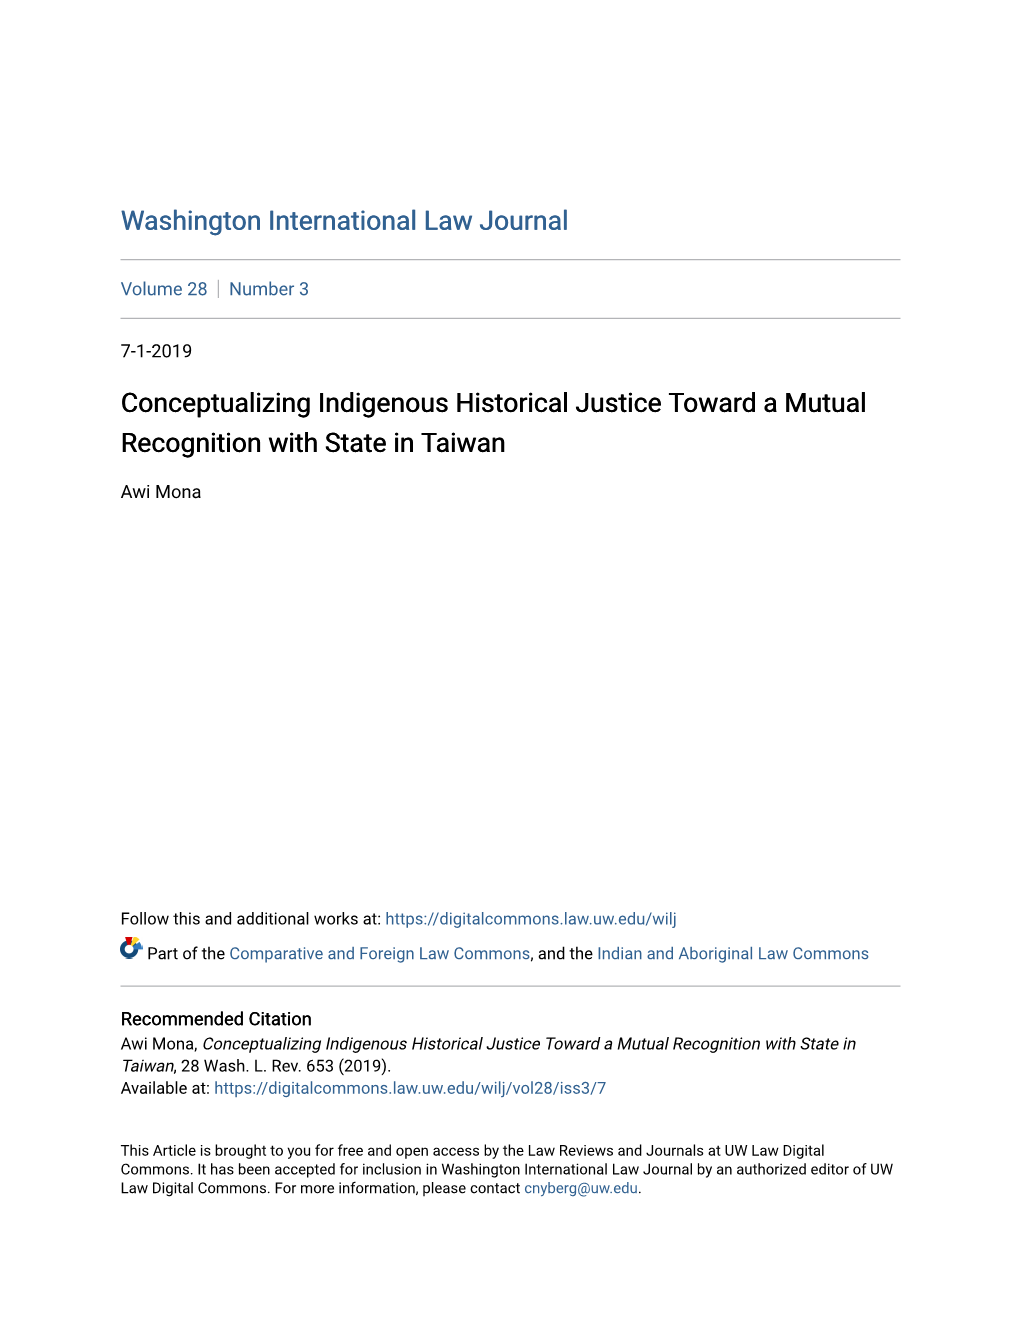 Conceptualizing Indigenous Historical Justice Toward a Mutual Recognition with State in Taiwan